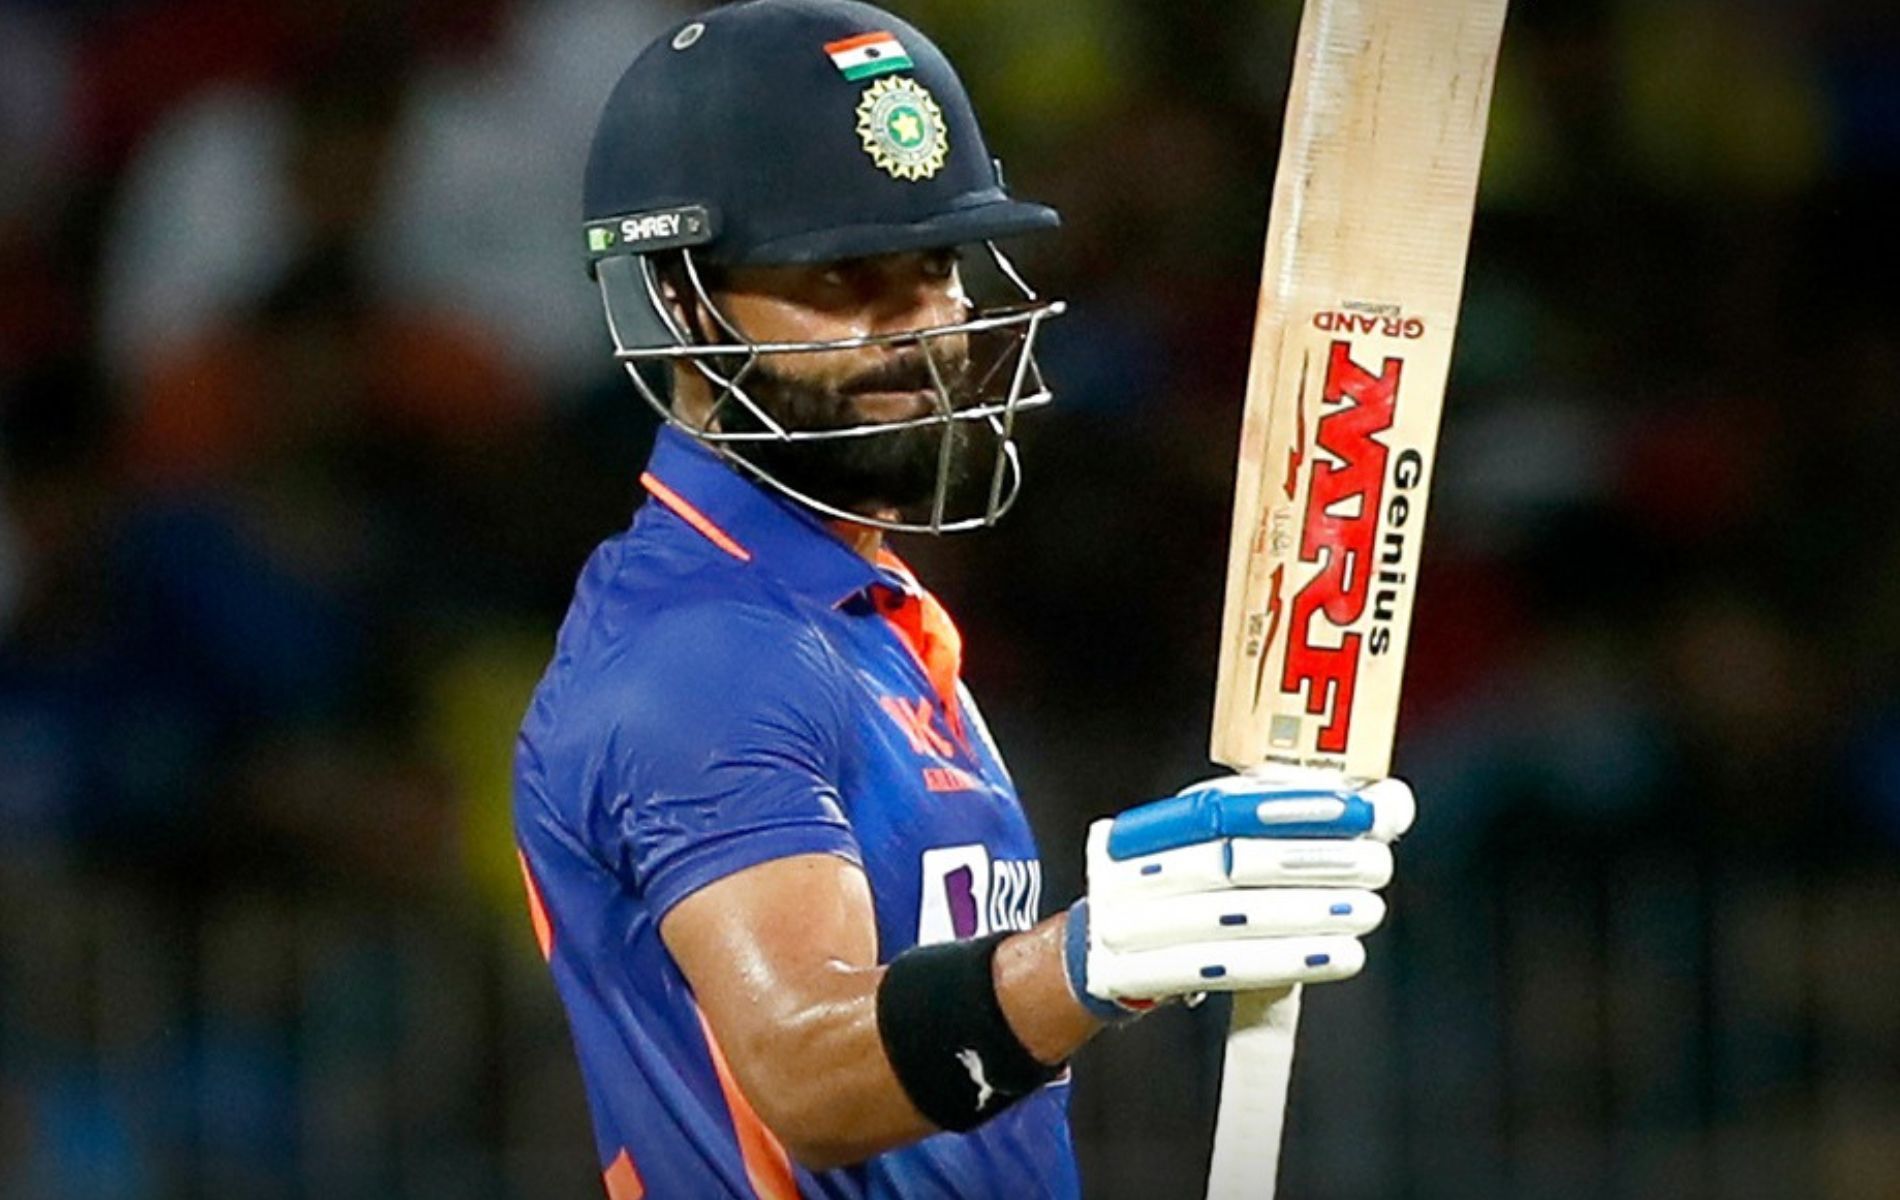 Virat Kohli departed soon after completing his 65th ODI half-century. (Pic: Twitter)